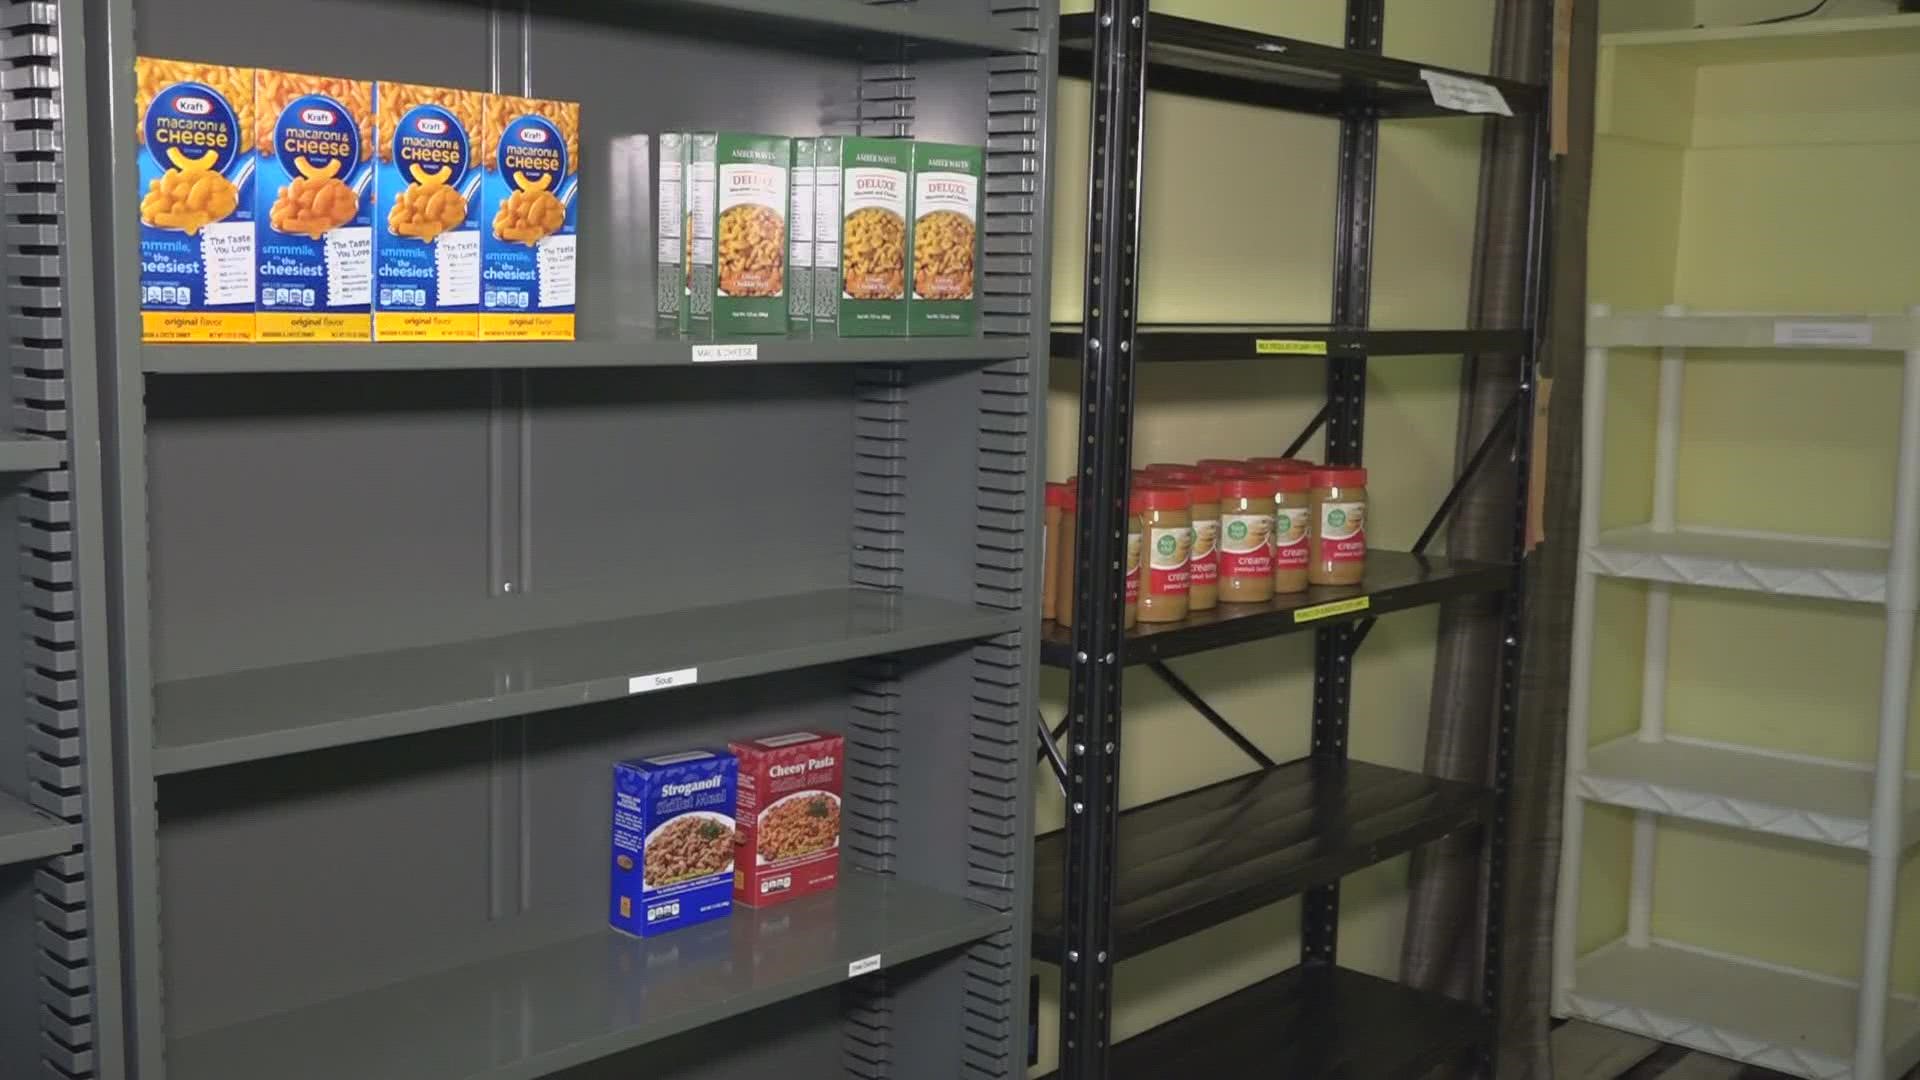 The University of Maine's food pantry is seeing 15 percent more visitors per week compared to this time last year.